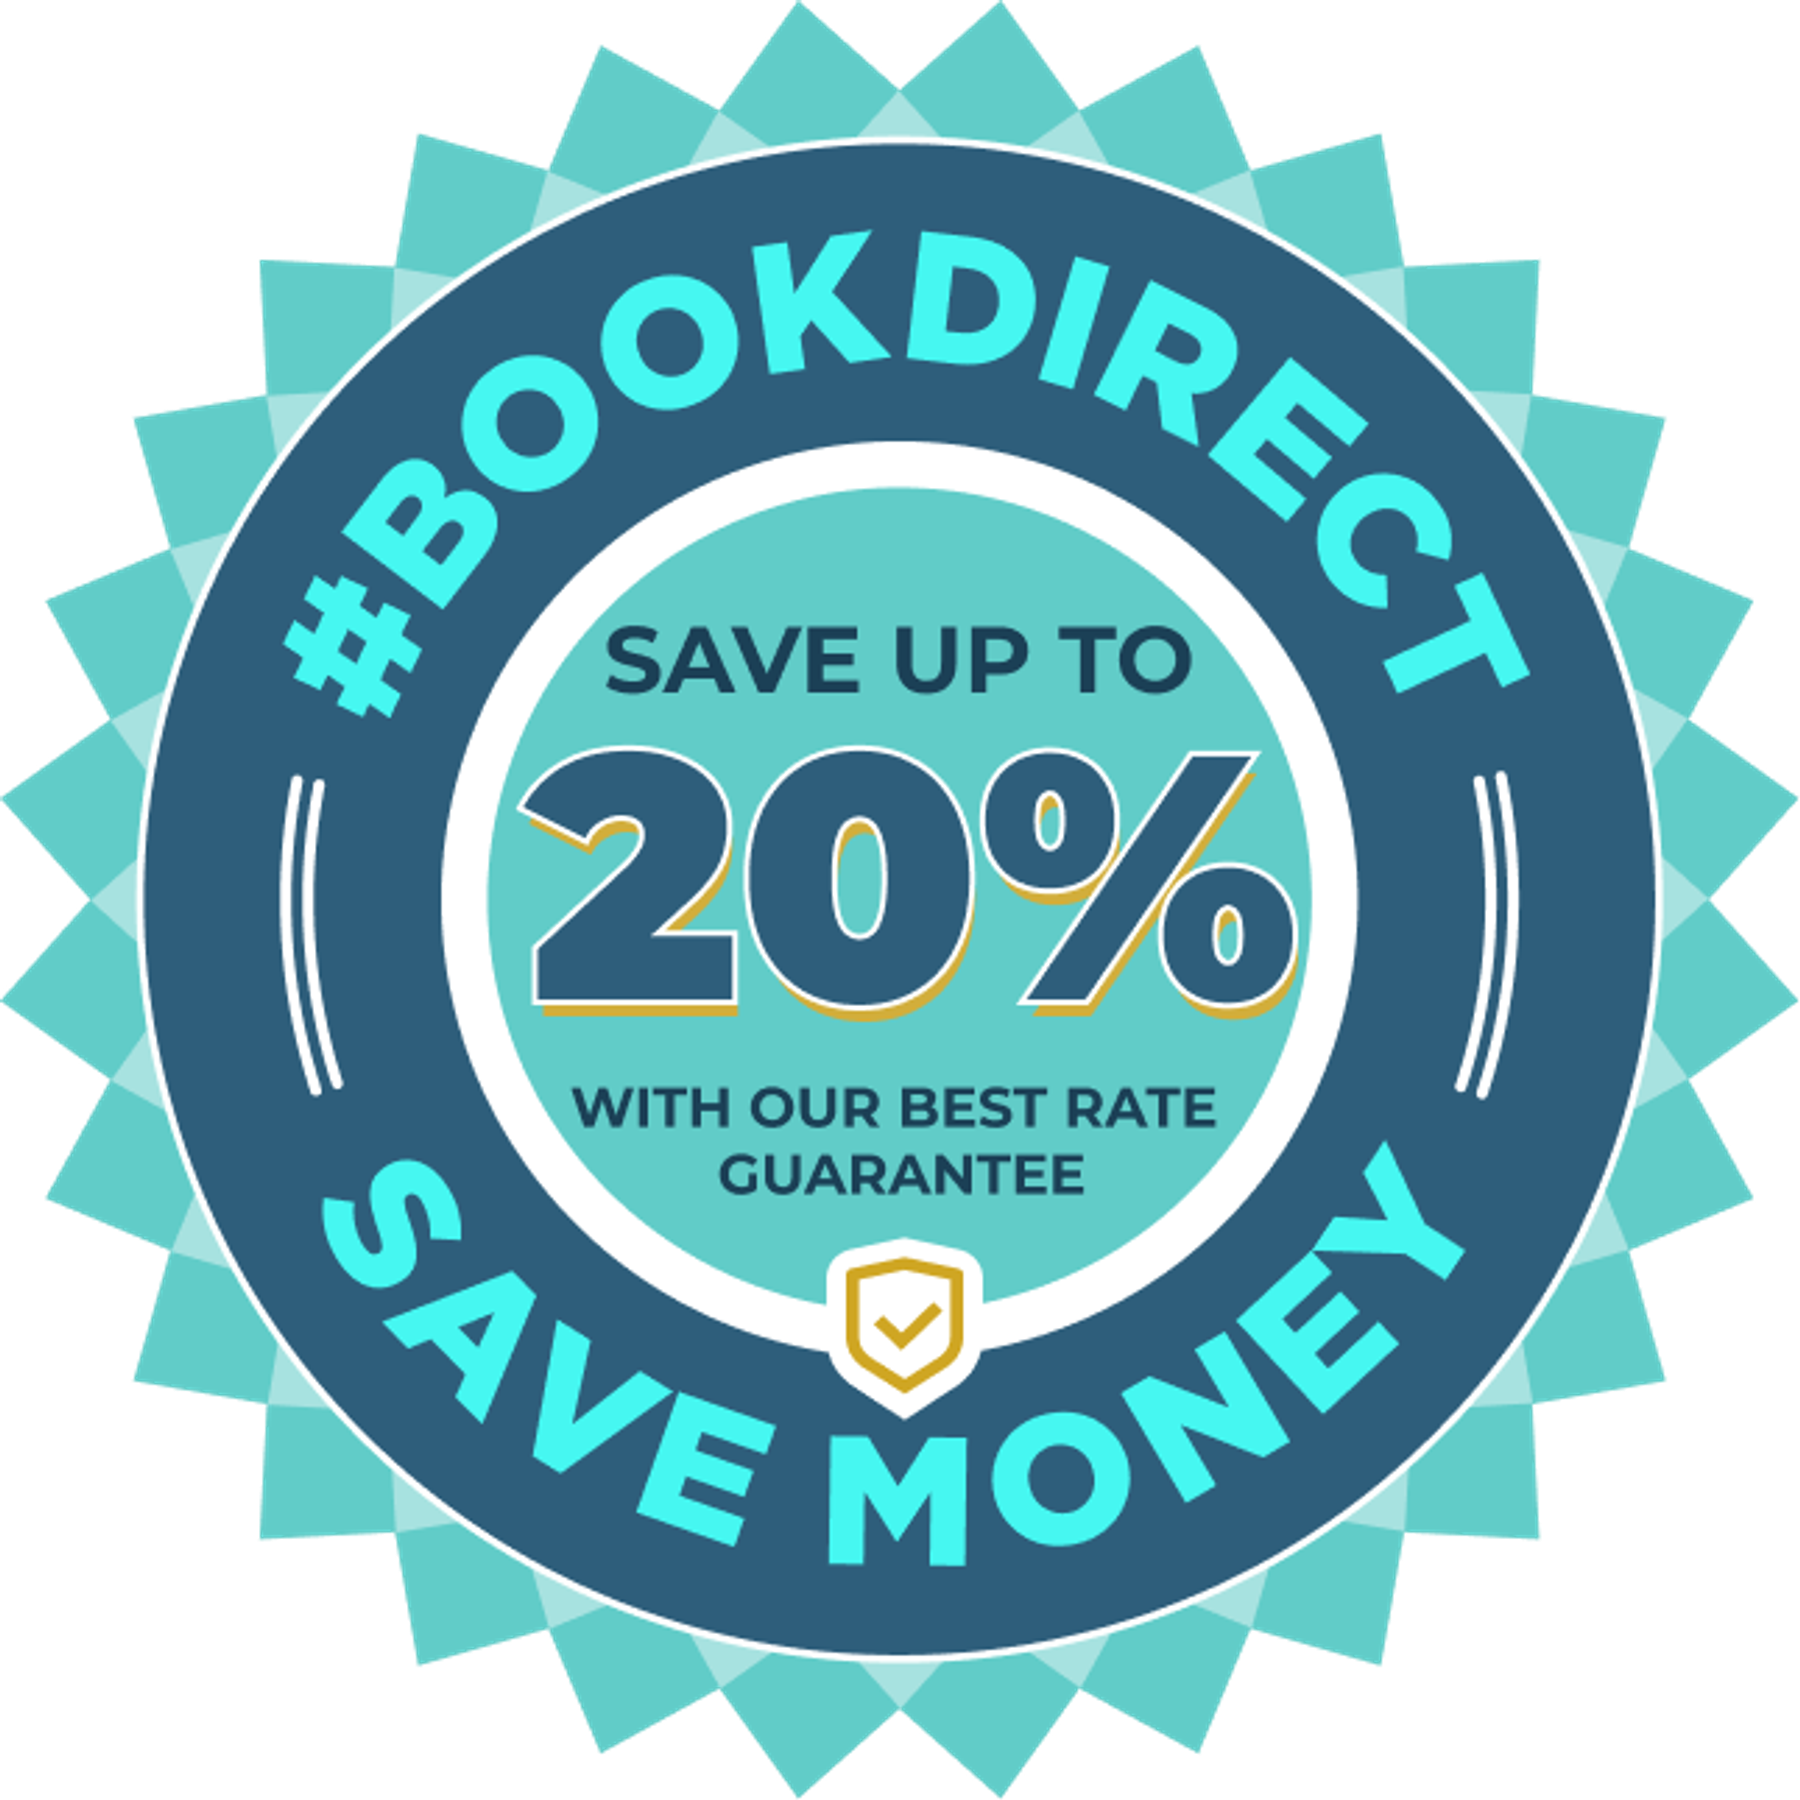 Book Direct and Save up to 20% with our Best Rate Guarantee